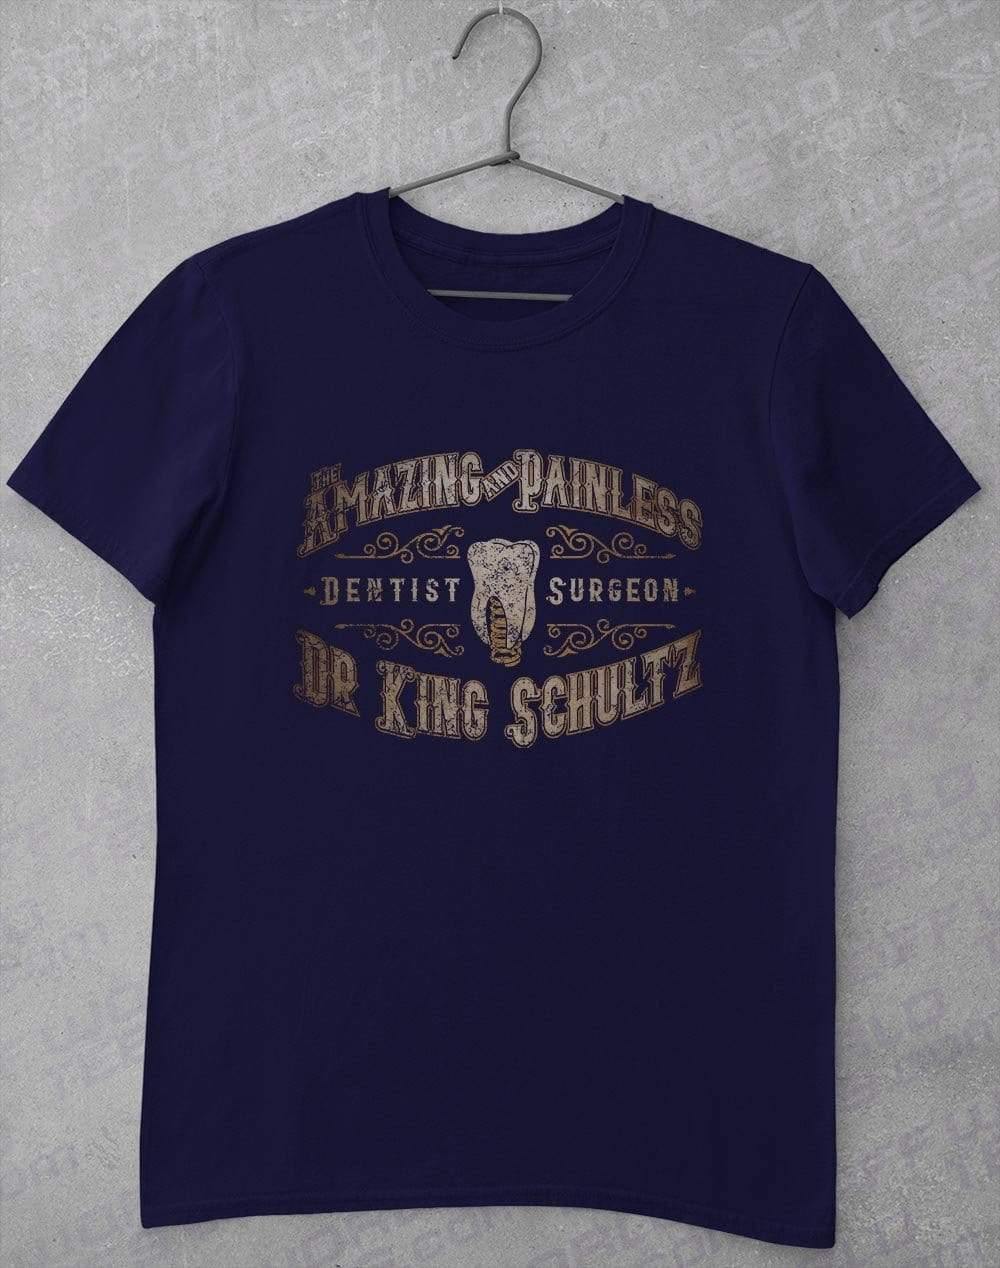 Dr. King Schultz Dentistry T Shirt S / Navy  - Off World Tees